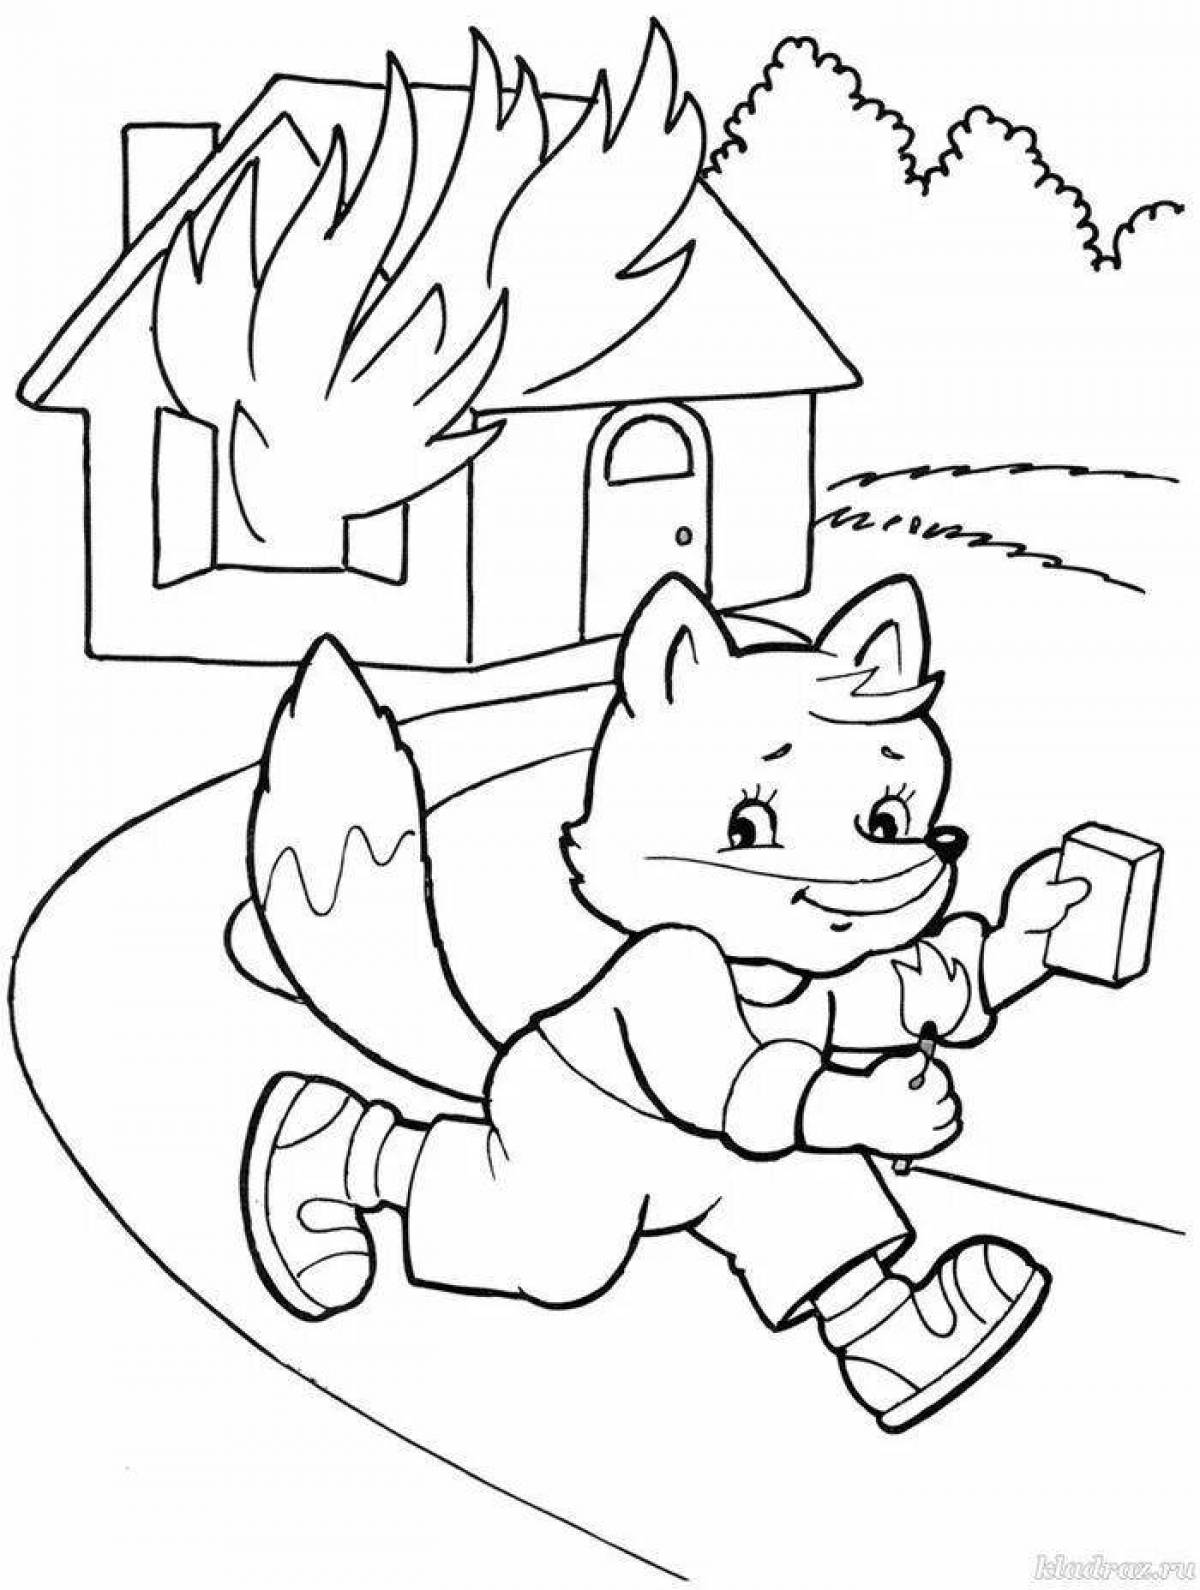 Coloring book dramatic fire safety